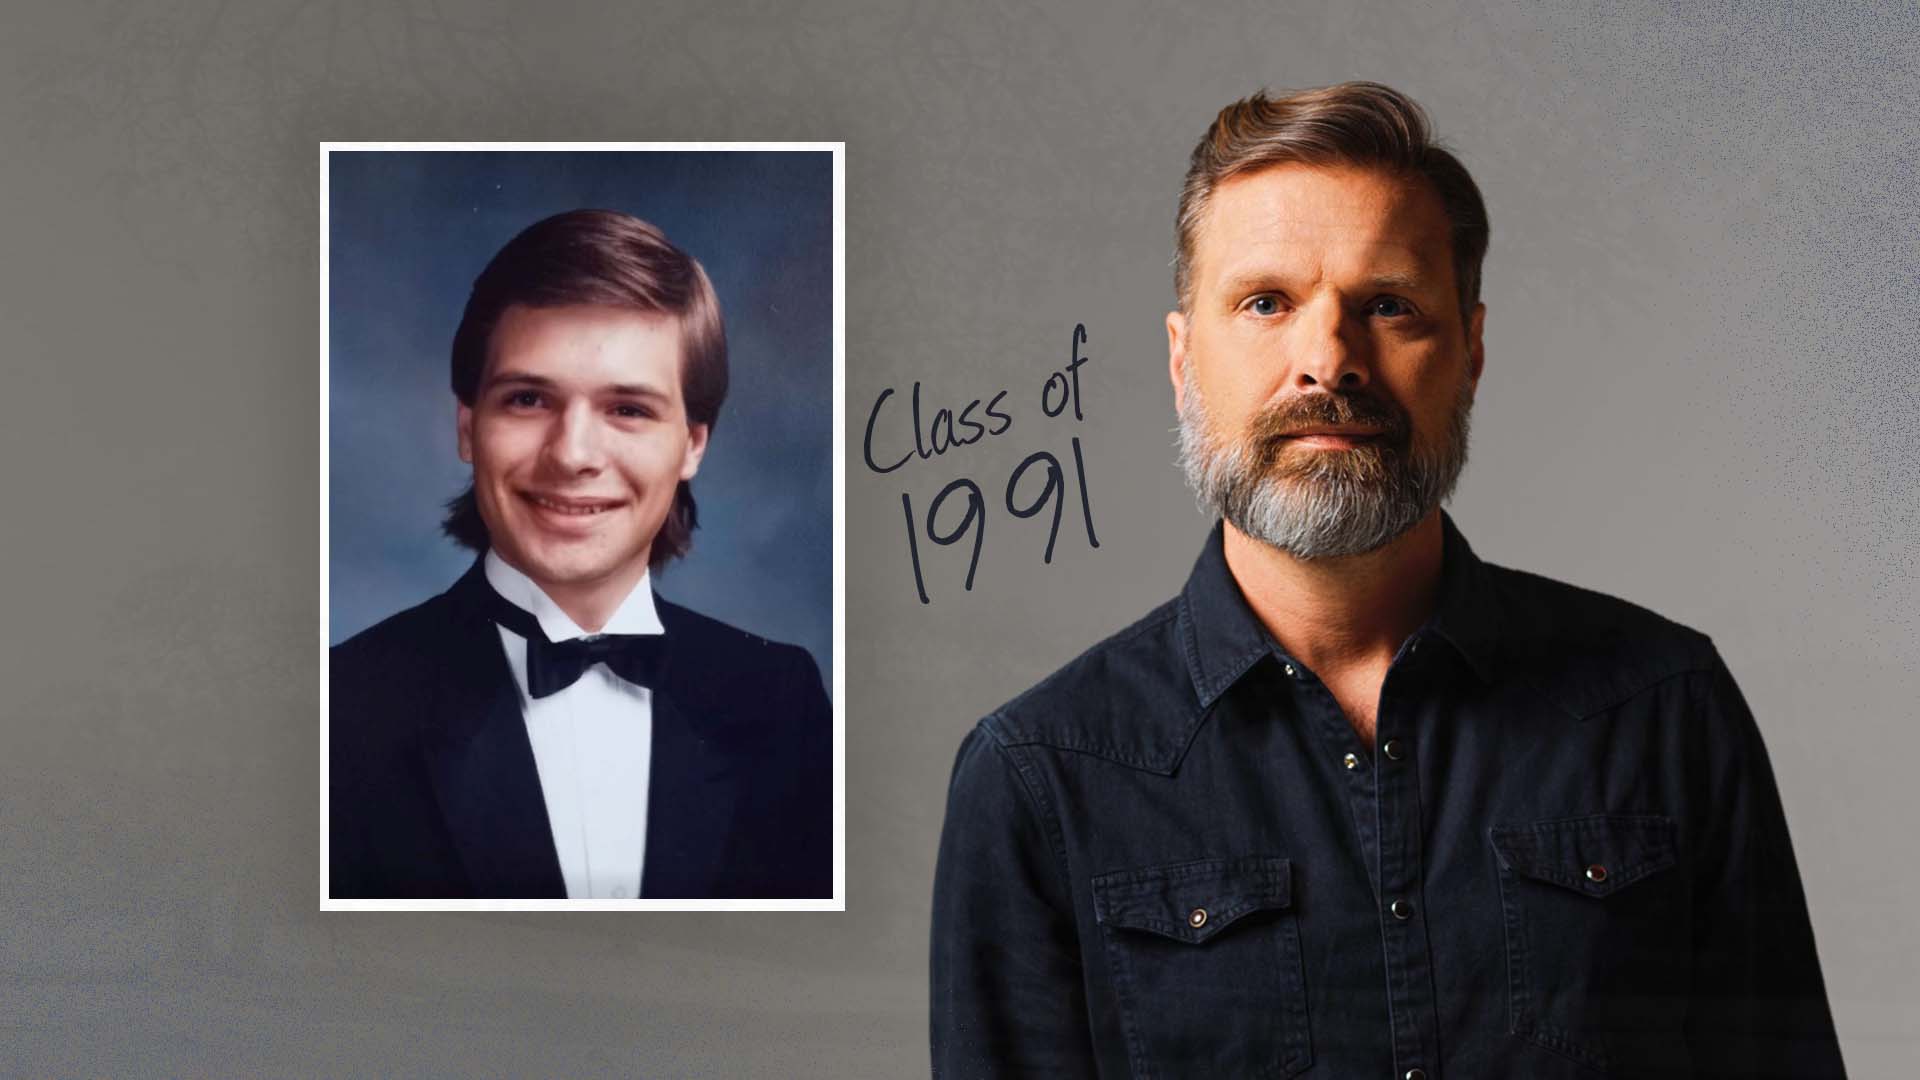 Mac Powell Shares His Personal Testimony in Song "1991"